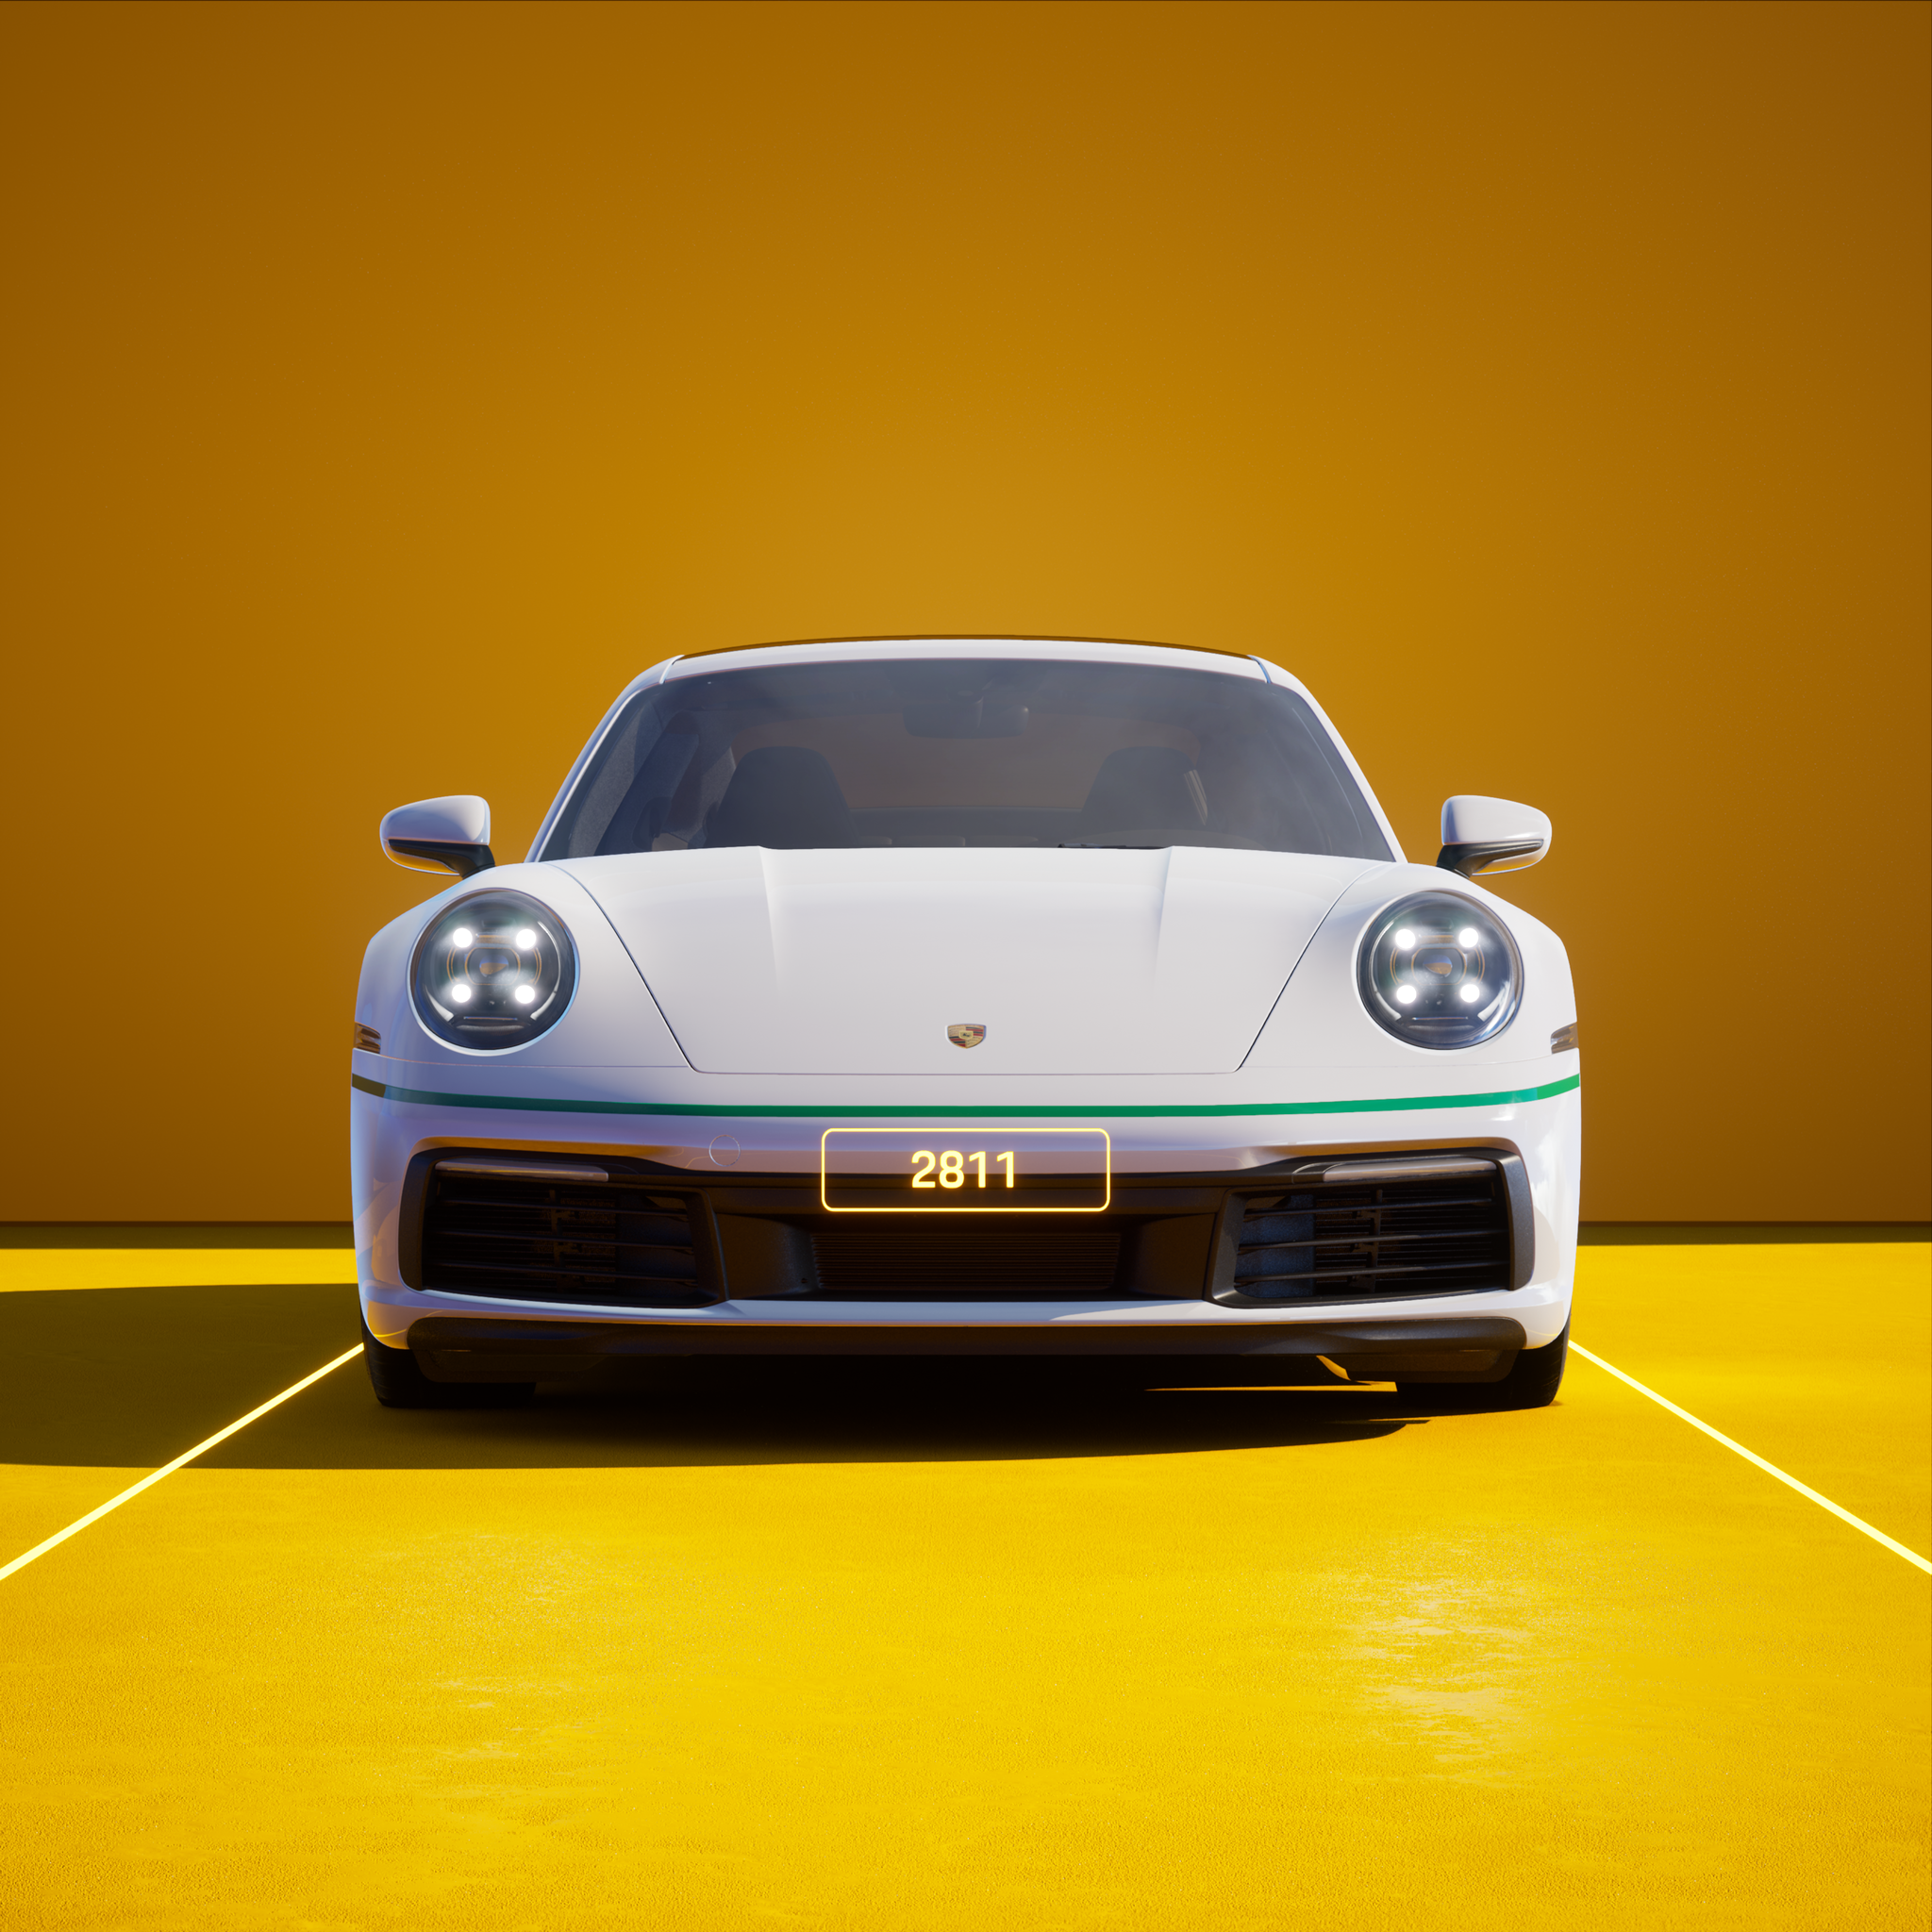 The PORSCHΞ 911 2811 image in phase